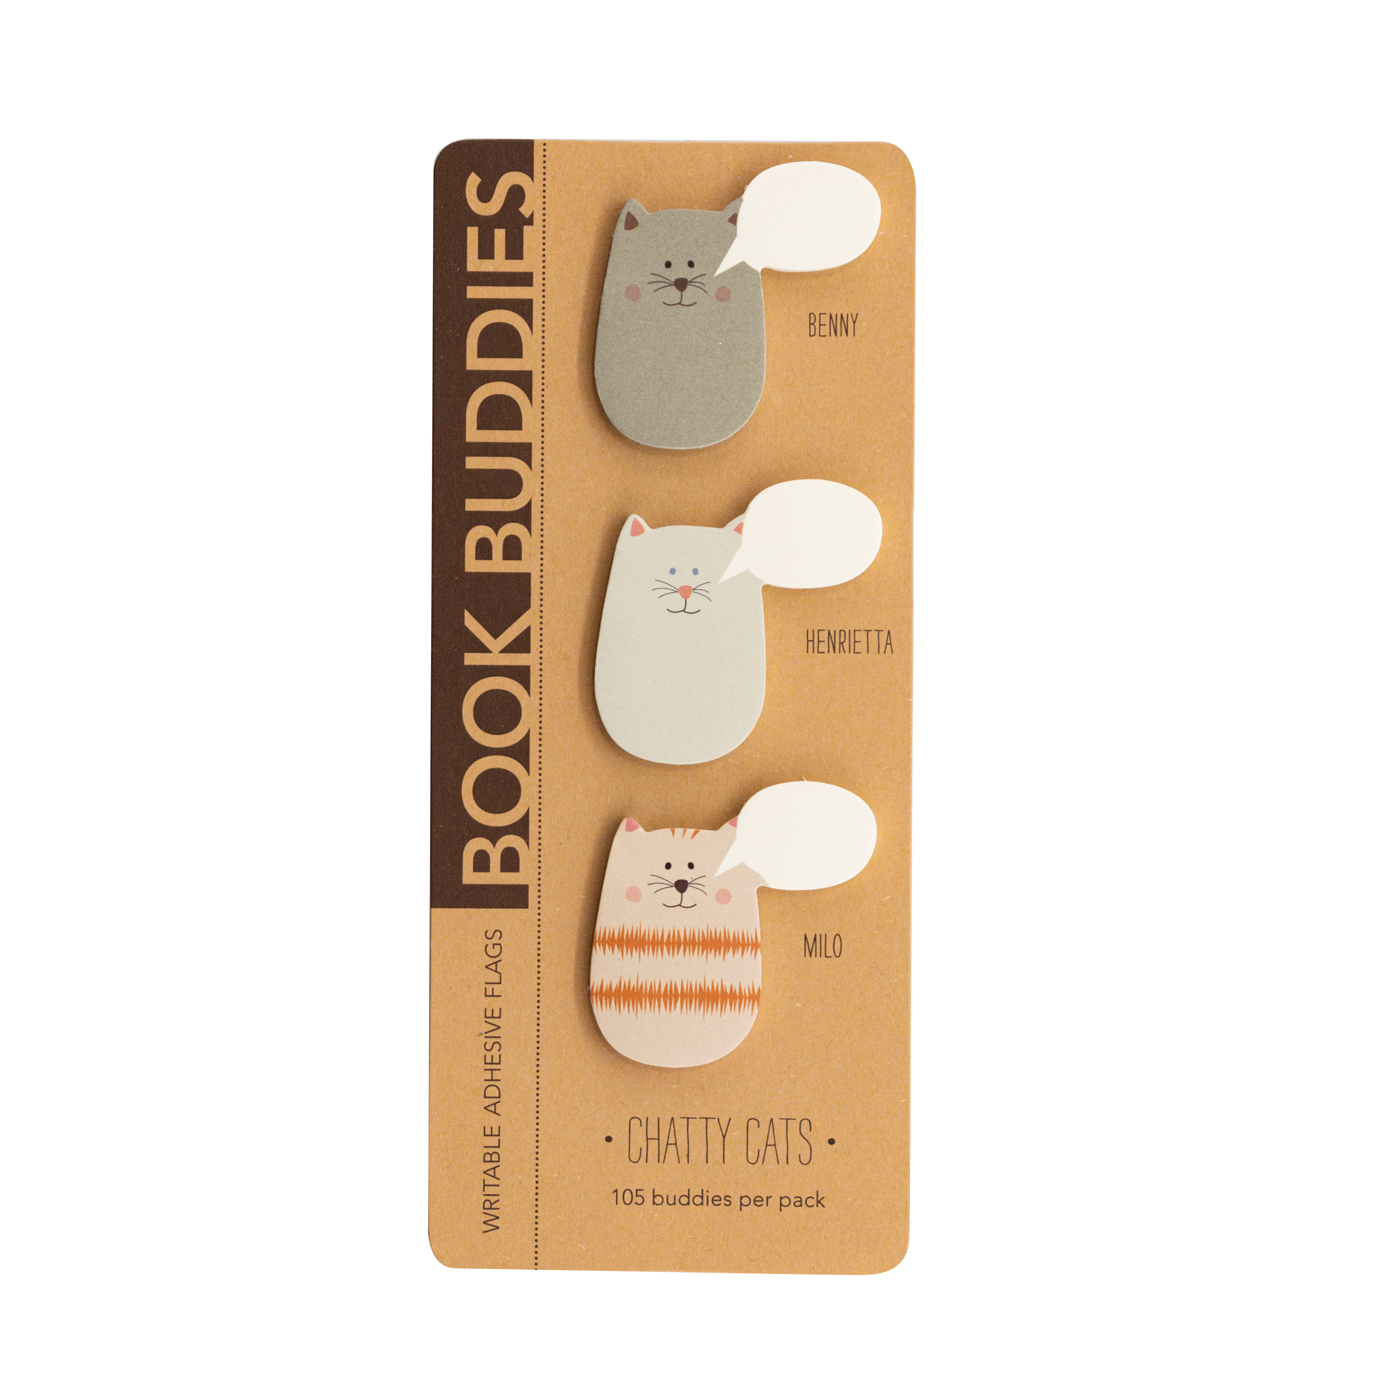 Girl of ALL WORK - Book Buddies - Adhesive flags - Chatty Cats